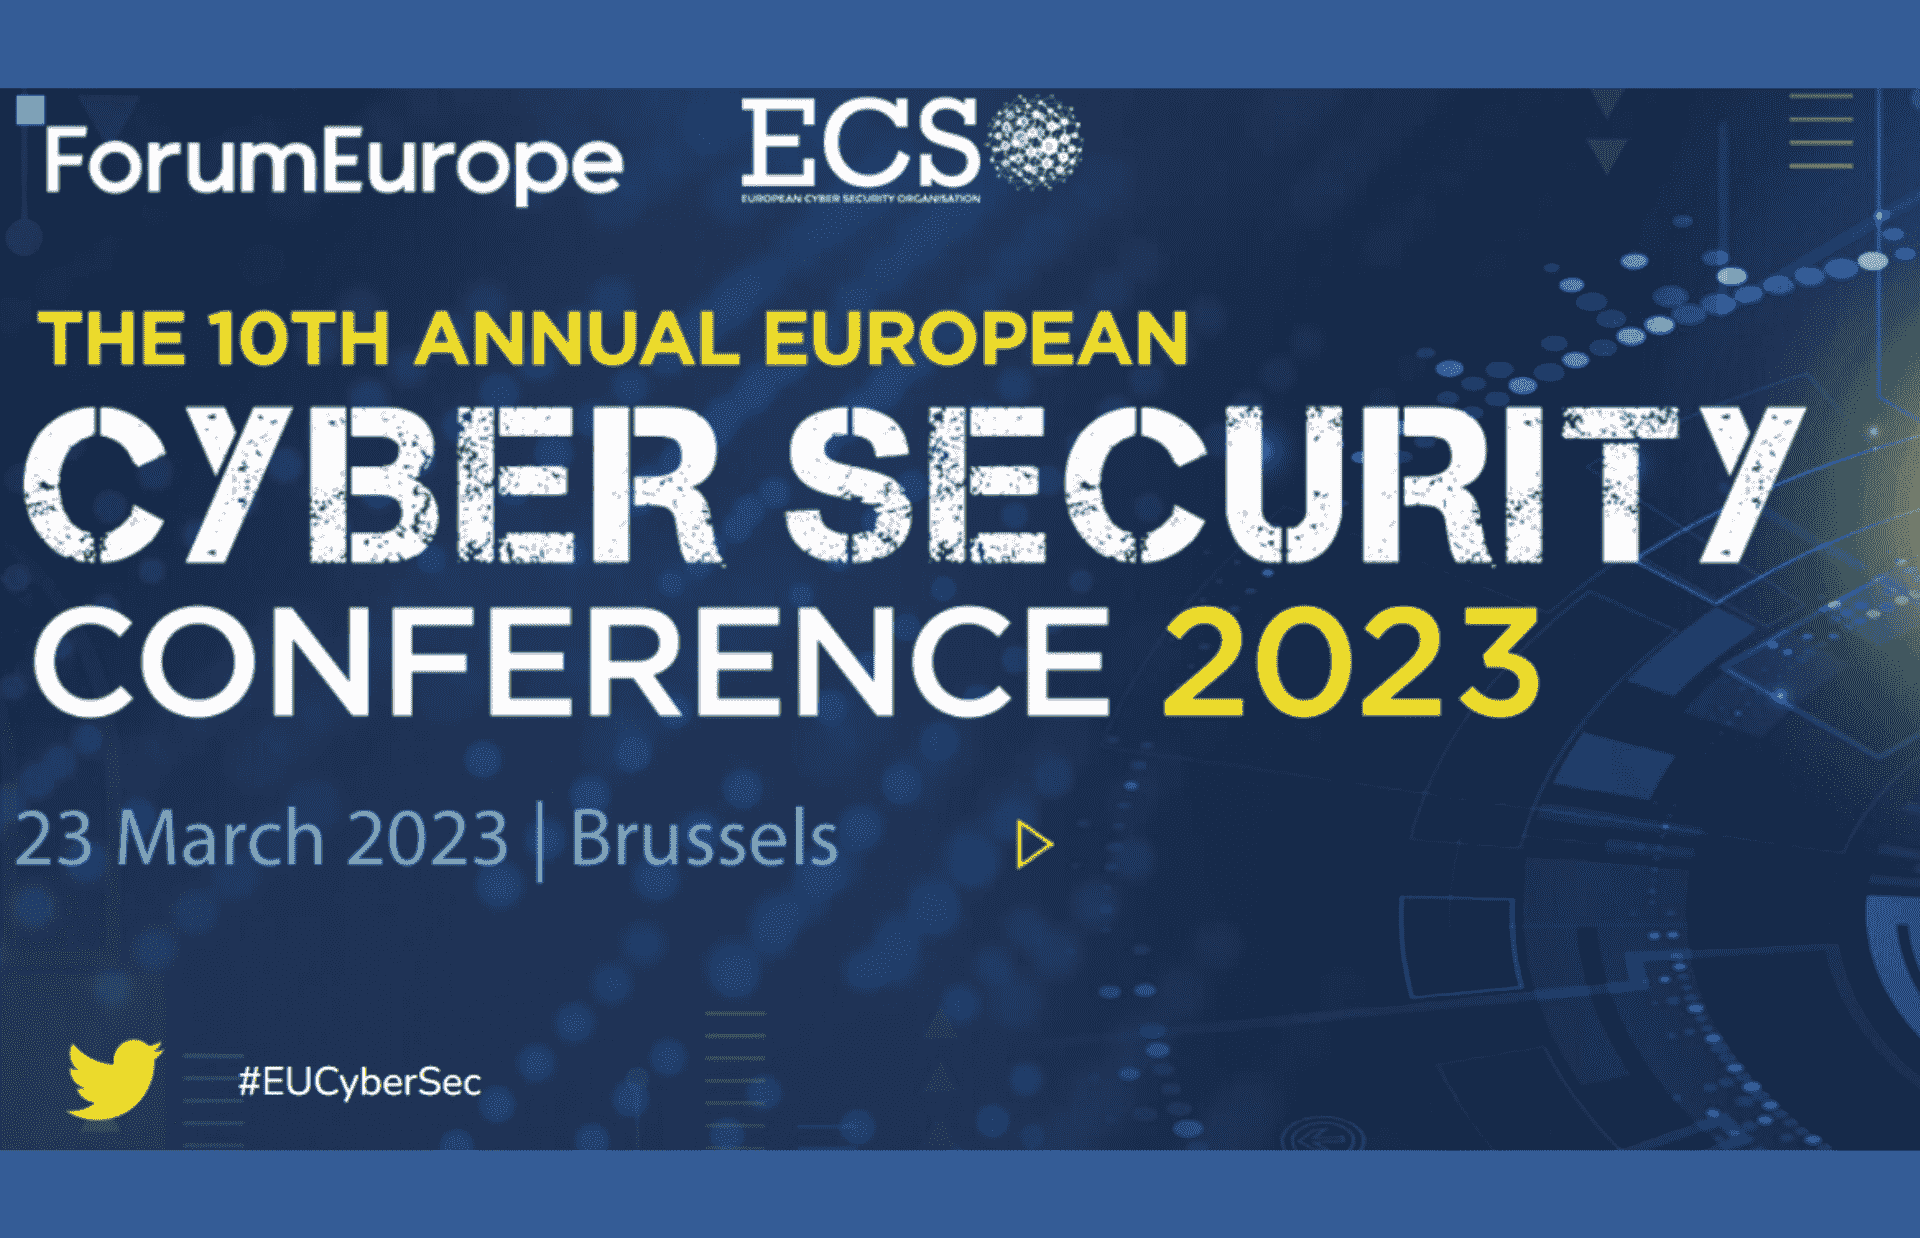 A visual for the European Cyber Security Conference 2023.